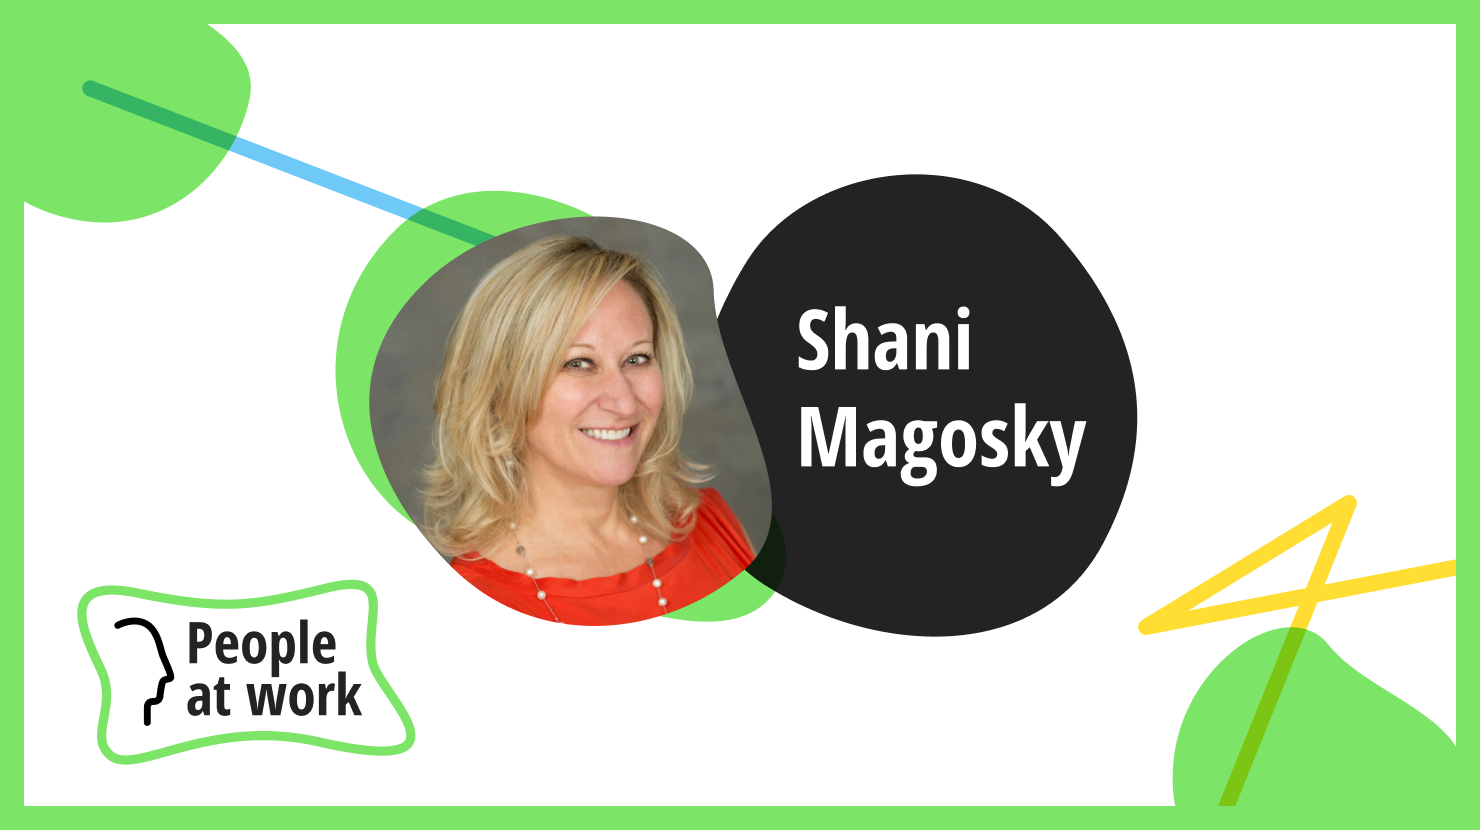 When we fail, we grow with Shani Magosky